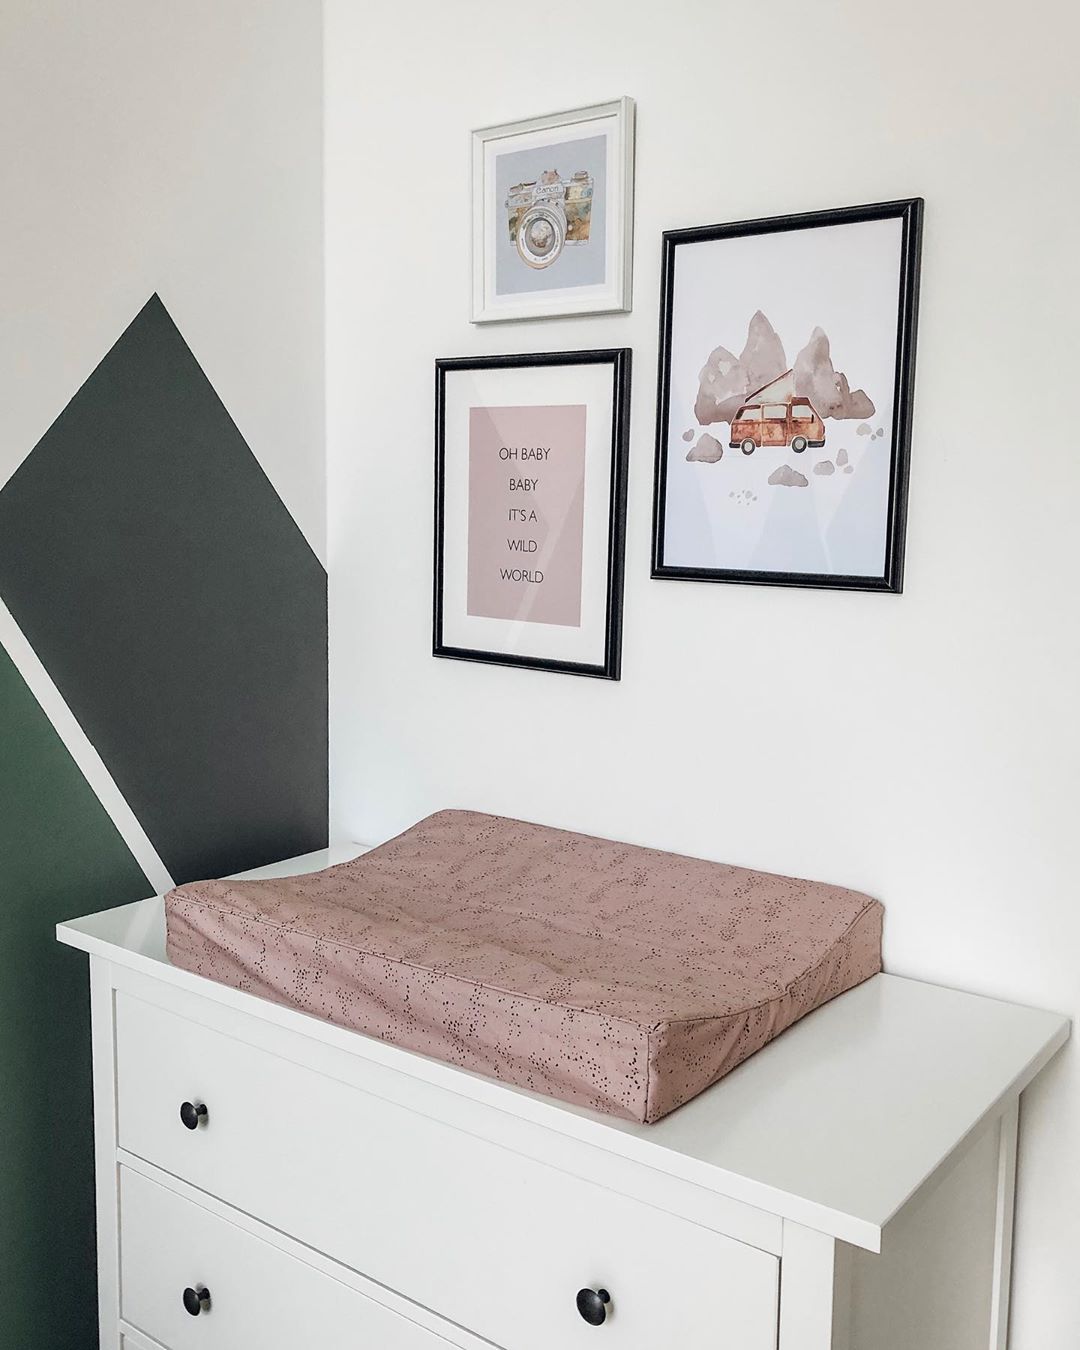 Changing table on dresser. Photo by Instagram user @so.lebt.sarah